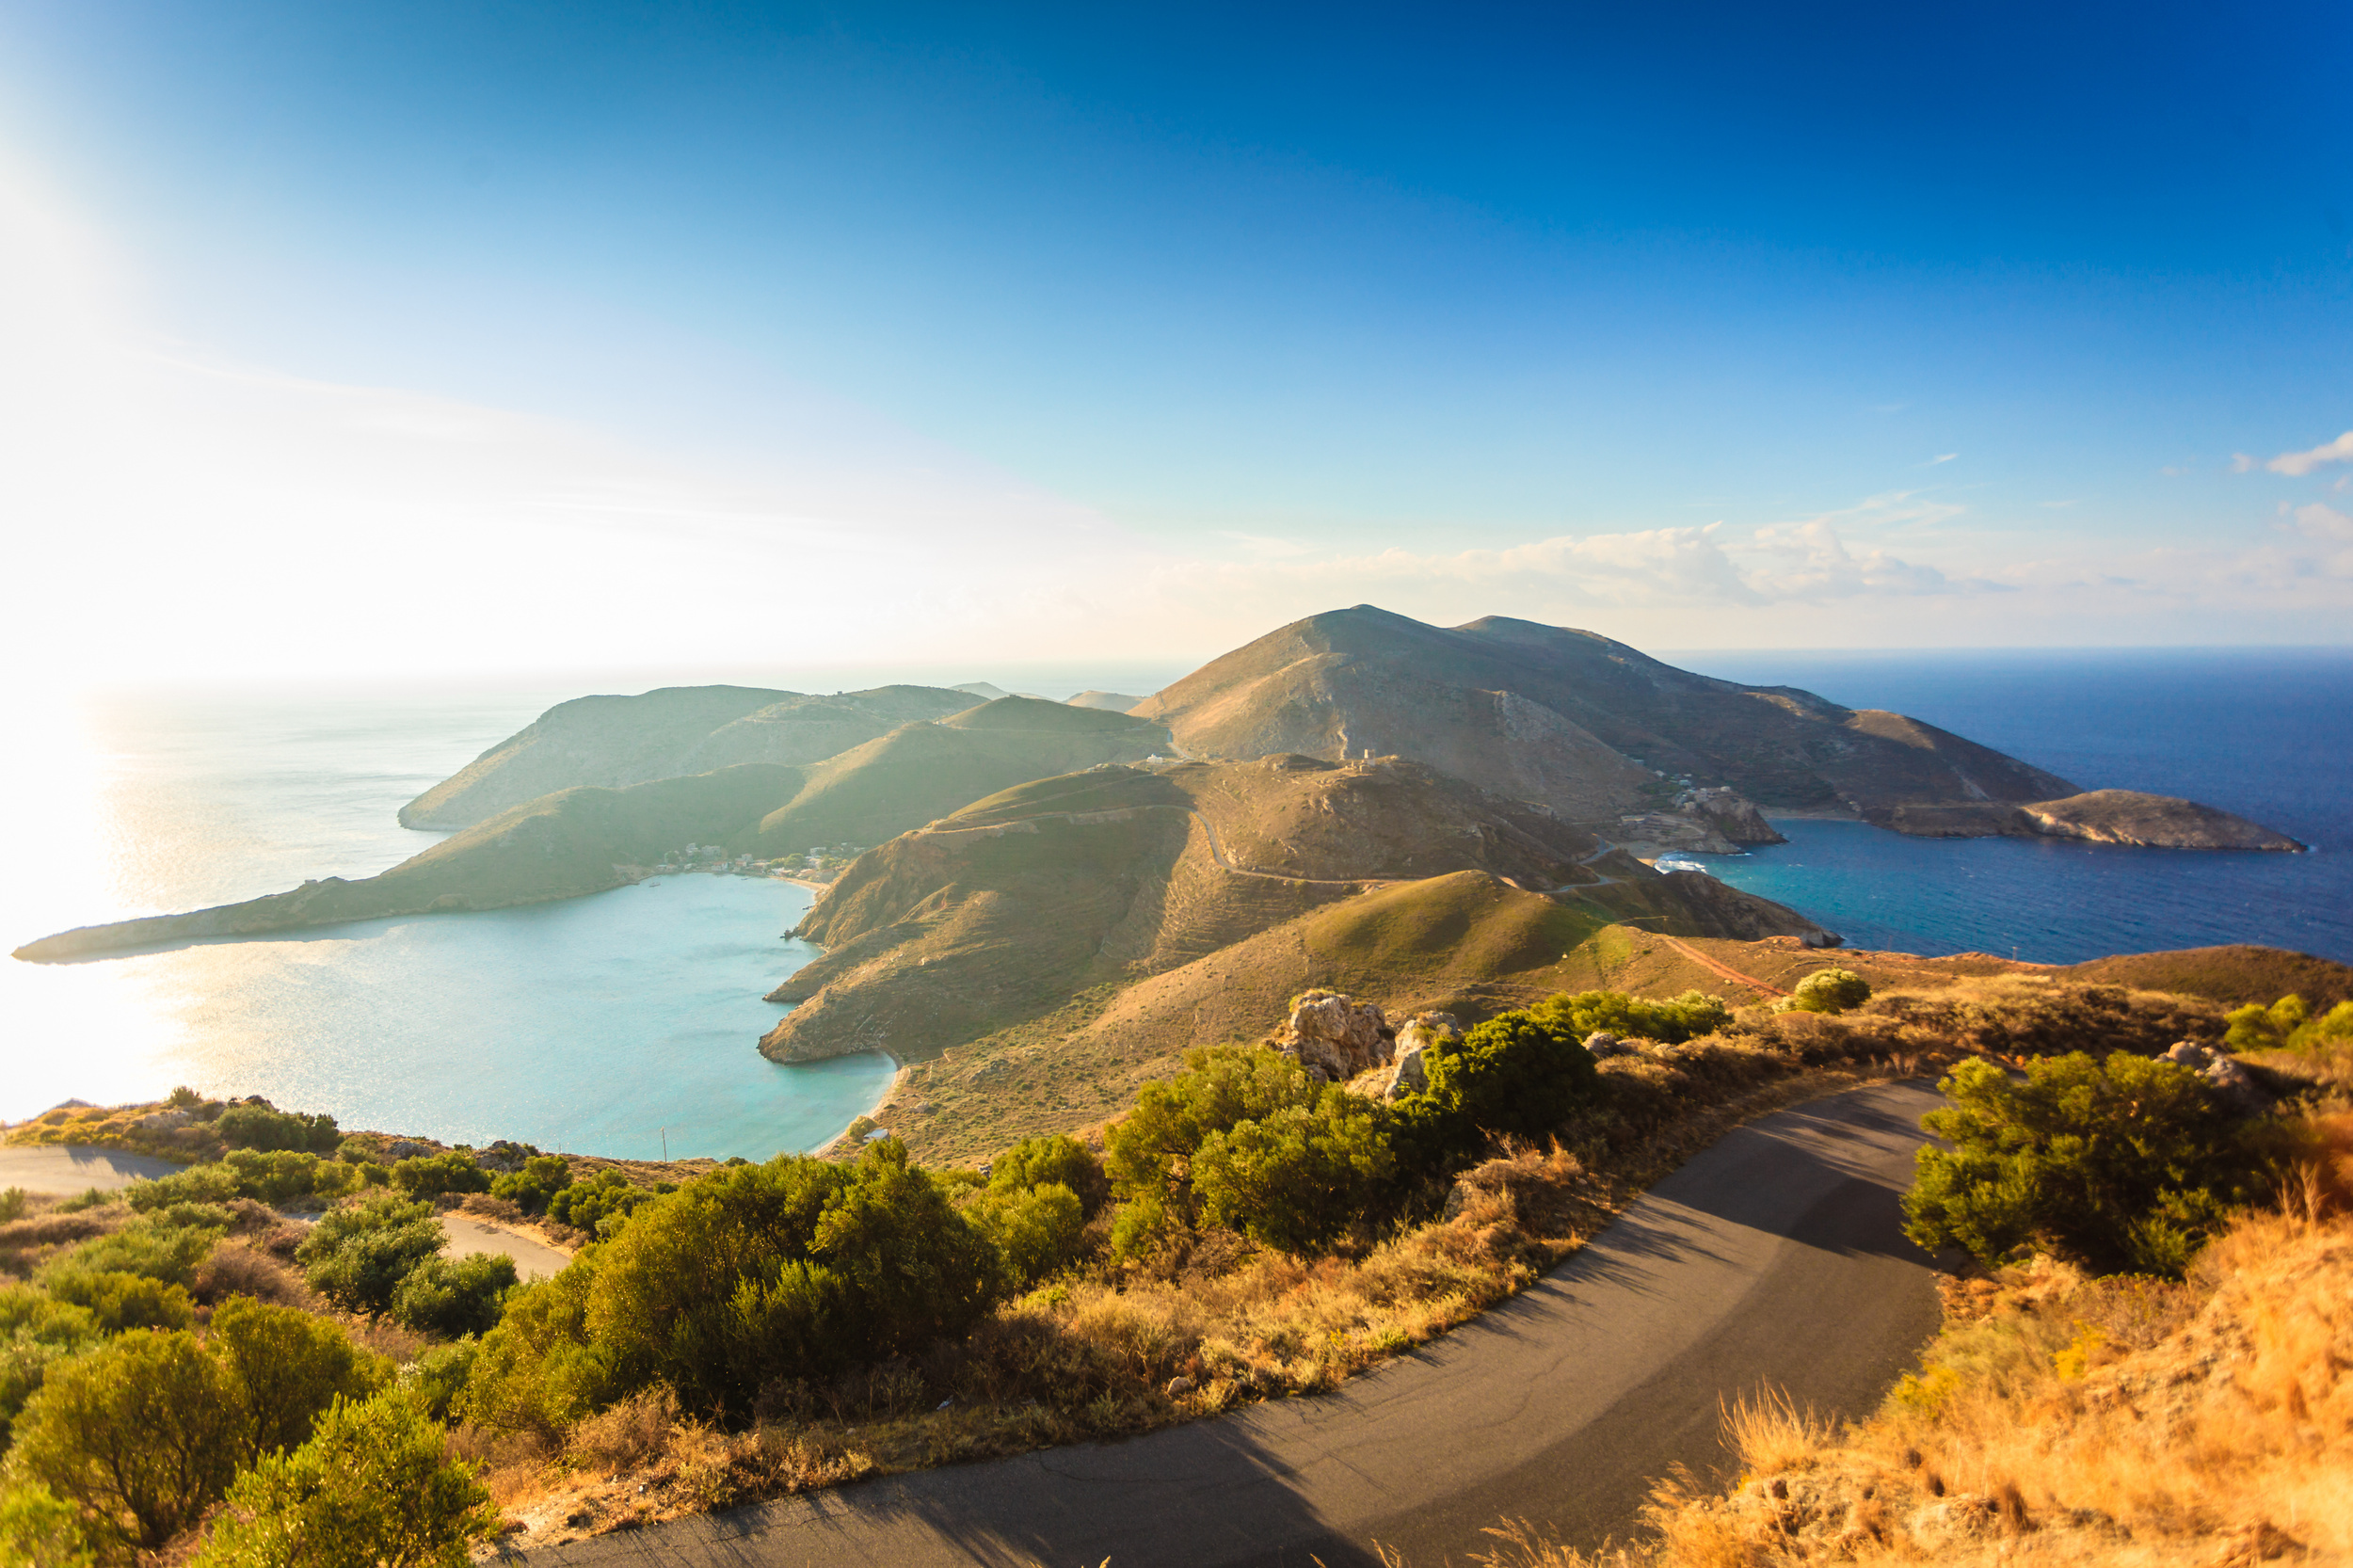 <p>On the southernmost tip of Greece lies the Mani Peninsula, home to undiscovered beaches and mostly empty villages that cling to the cliff sides. Rent a car to follow the meandering roads and enjoy the rugged landscape.</p><p>You may also like: <a href='https://www.yardbarker.com/lifestyle/articles/the_14_most_beautiful_canadian_parks_to_visit/s1__38393750'>The 14 most beautiful Canadian parks to visit</a></p>